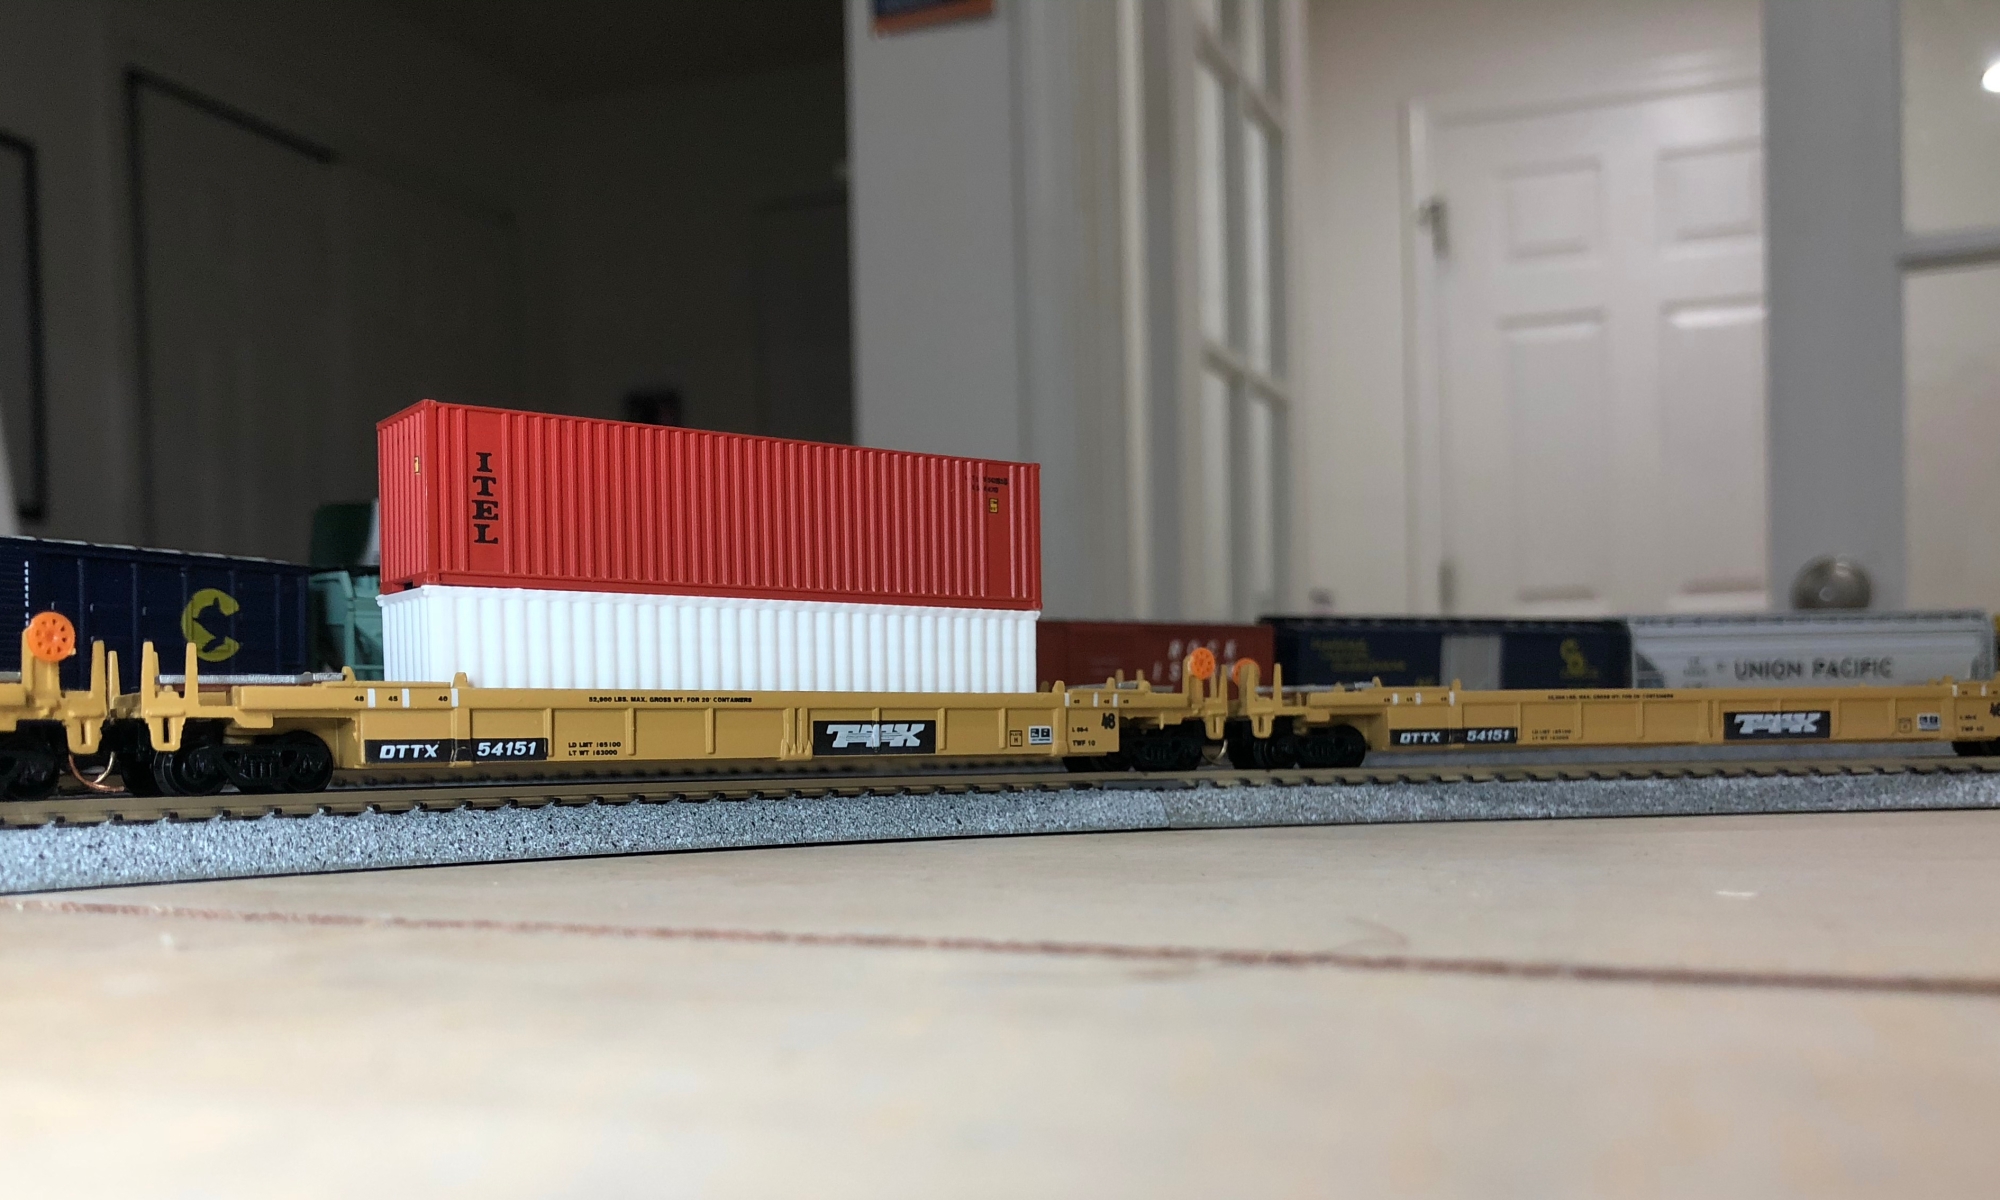 3D Printed container (White) on N Scale railcar